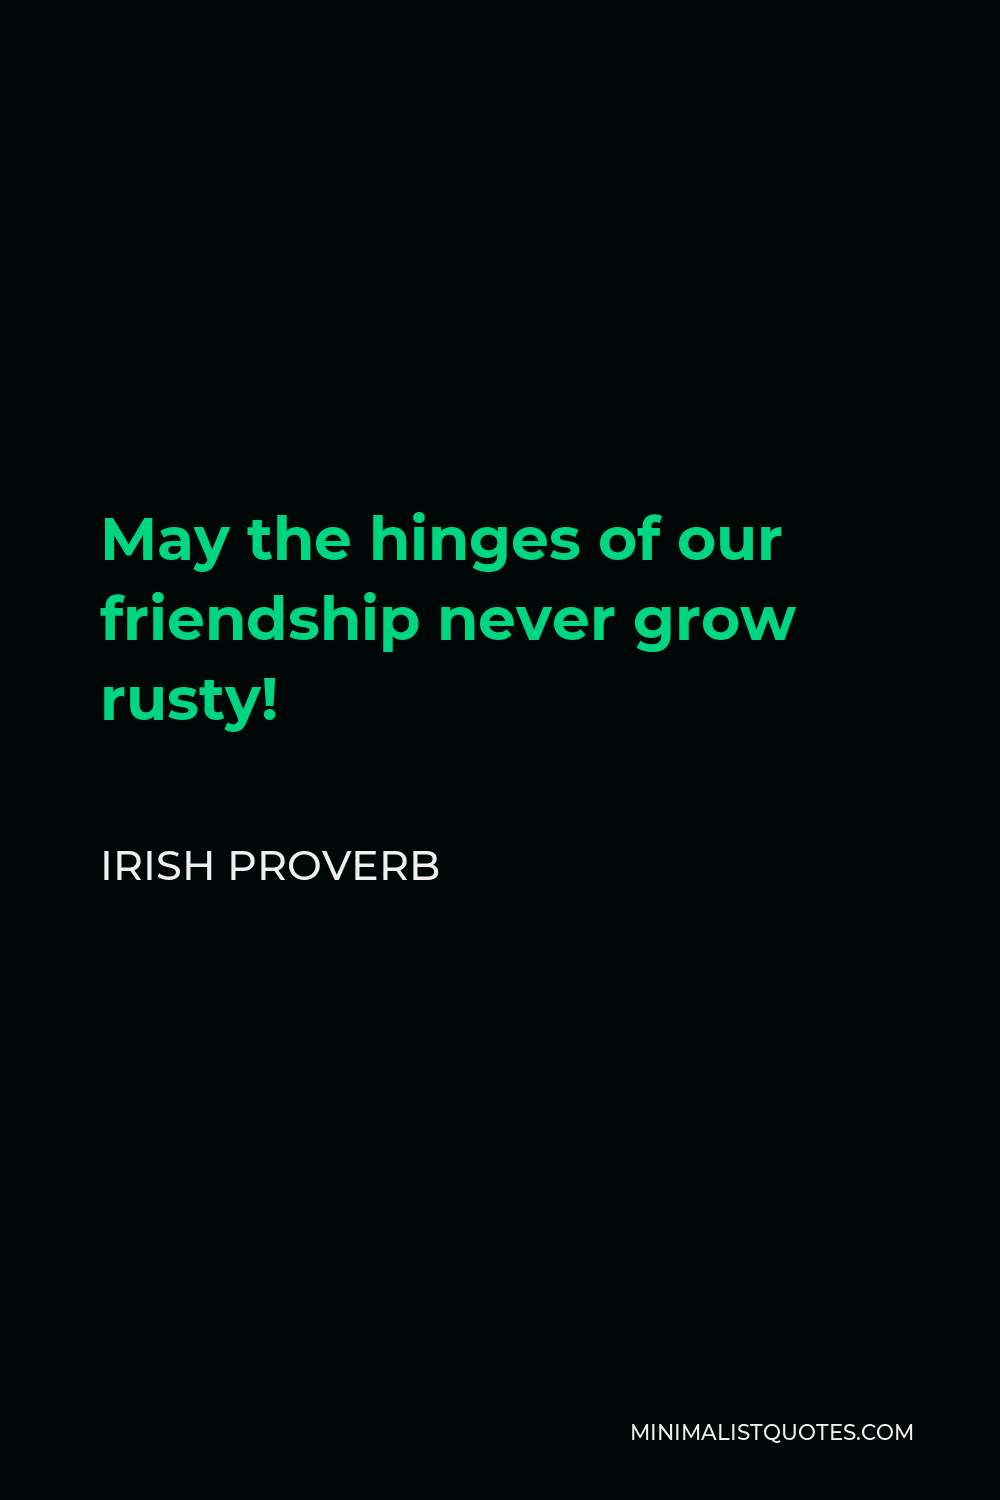 Irish Proverb Quote - May the hinges of our friendship never grow rusty!